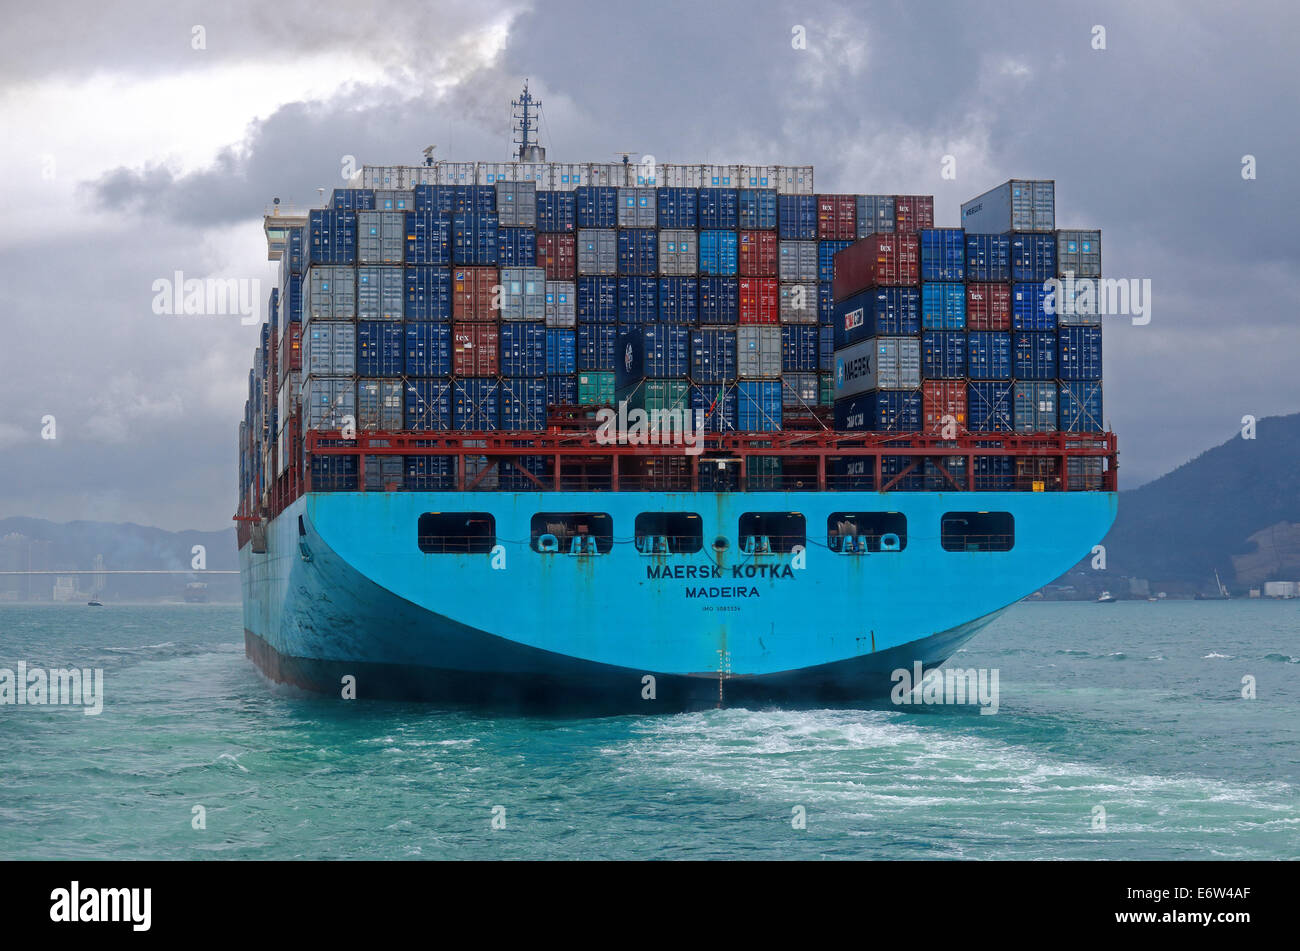 Container ship MAERSK KOTKA (Flag: Portugal) with containers in Hong Kong Stock Photo